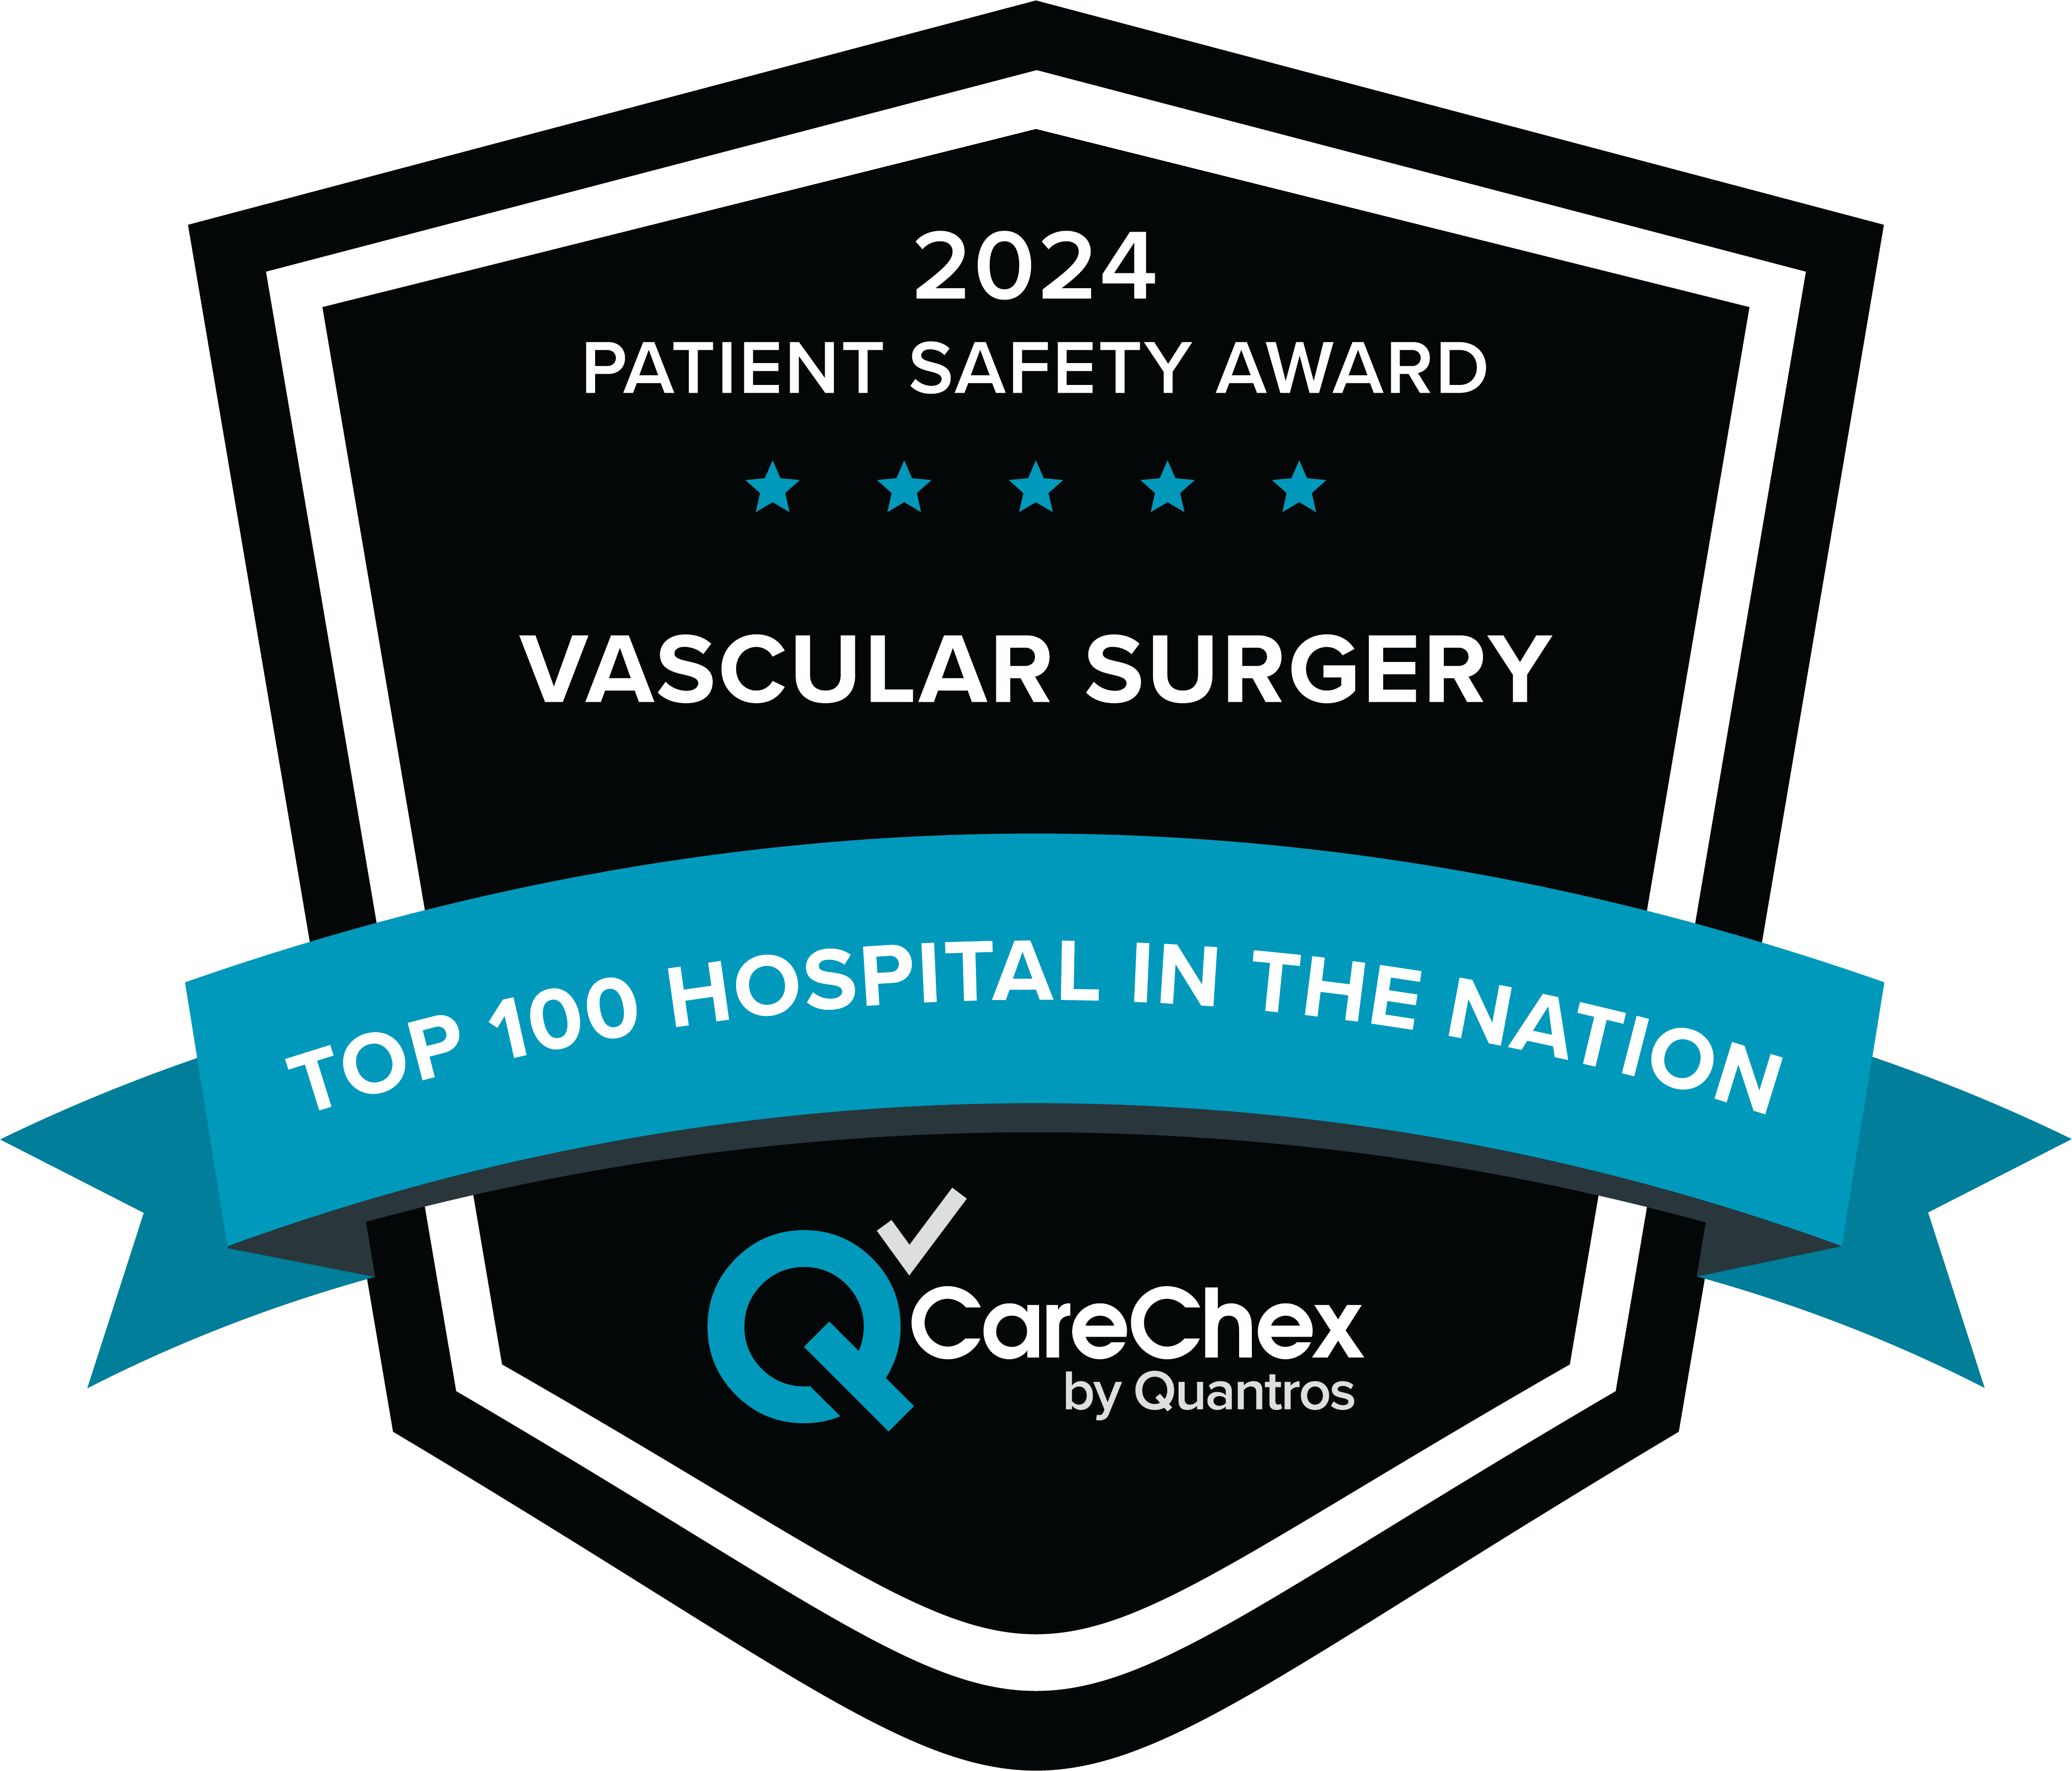 Awards badge for Top 100 Hospital in the Nation for Patient Safety in Vascular Surgery – 2024 CareChex by Quantros